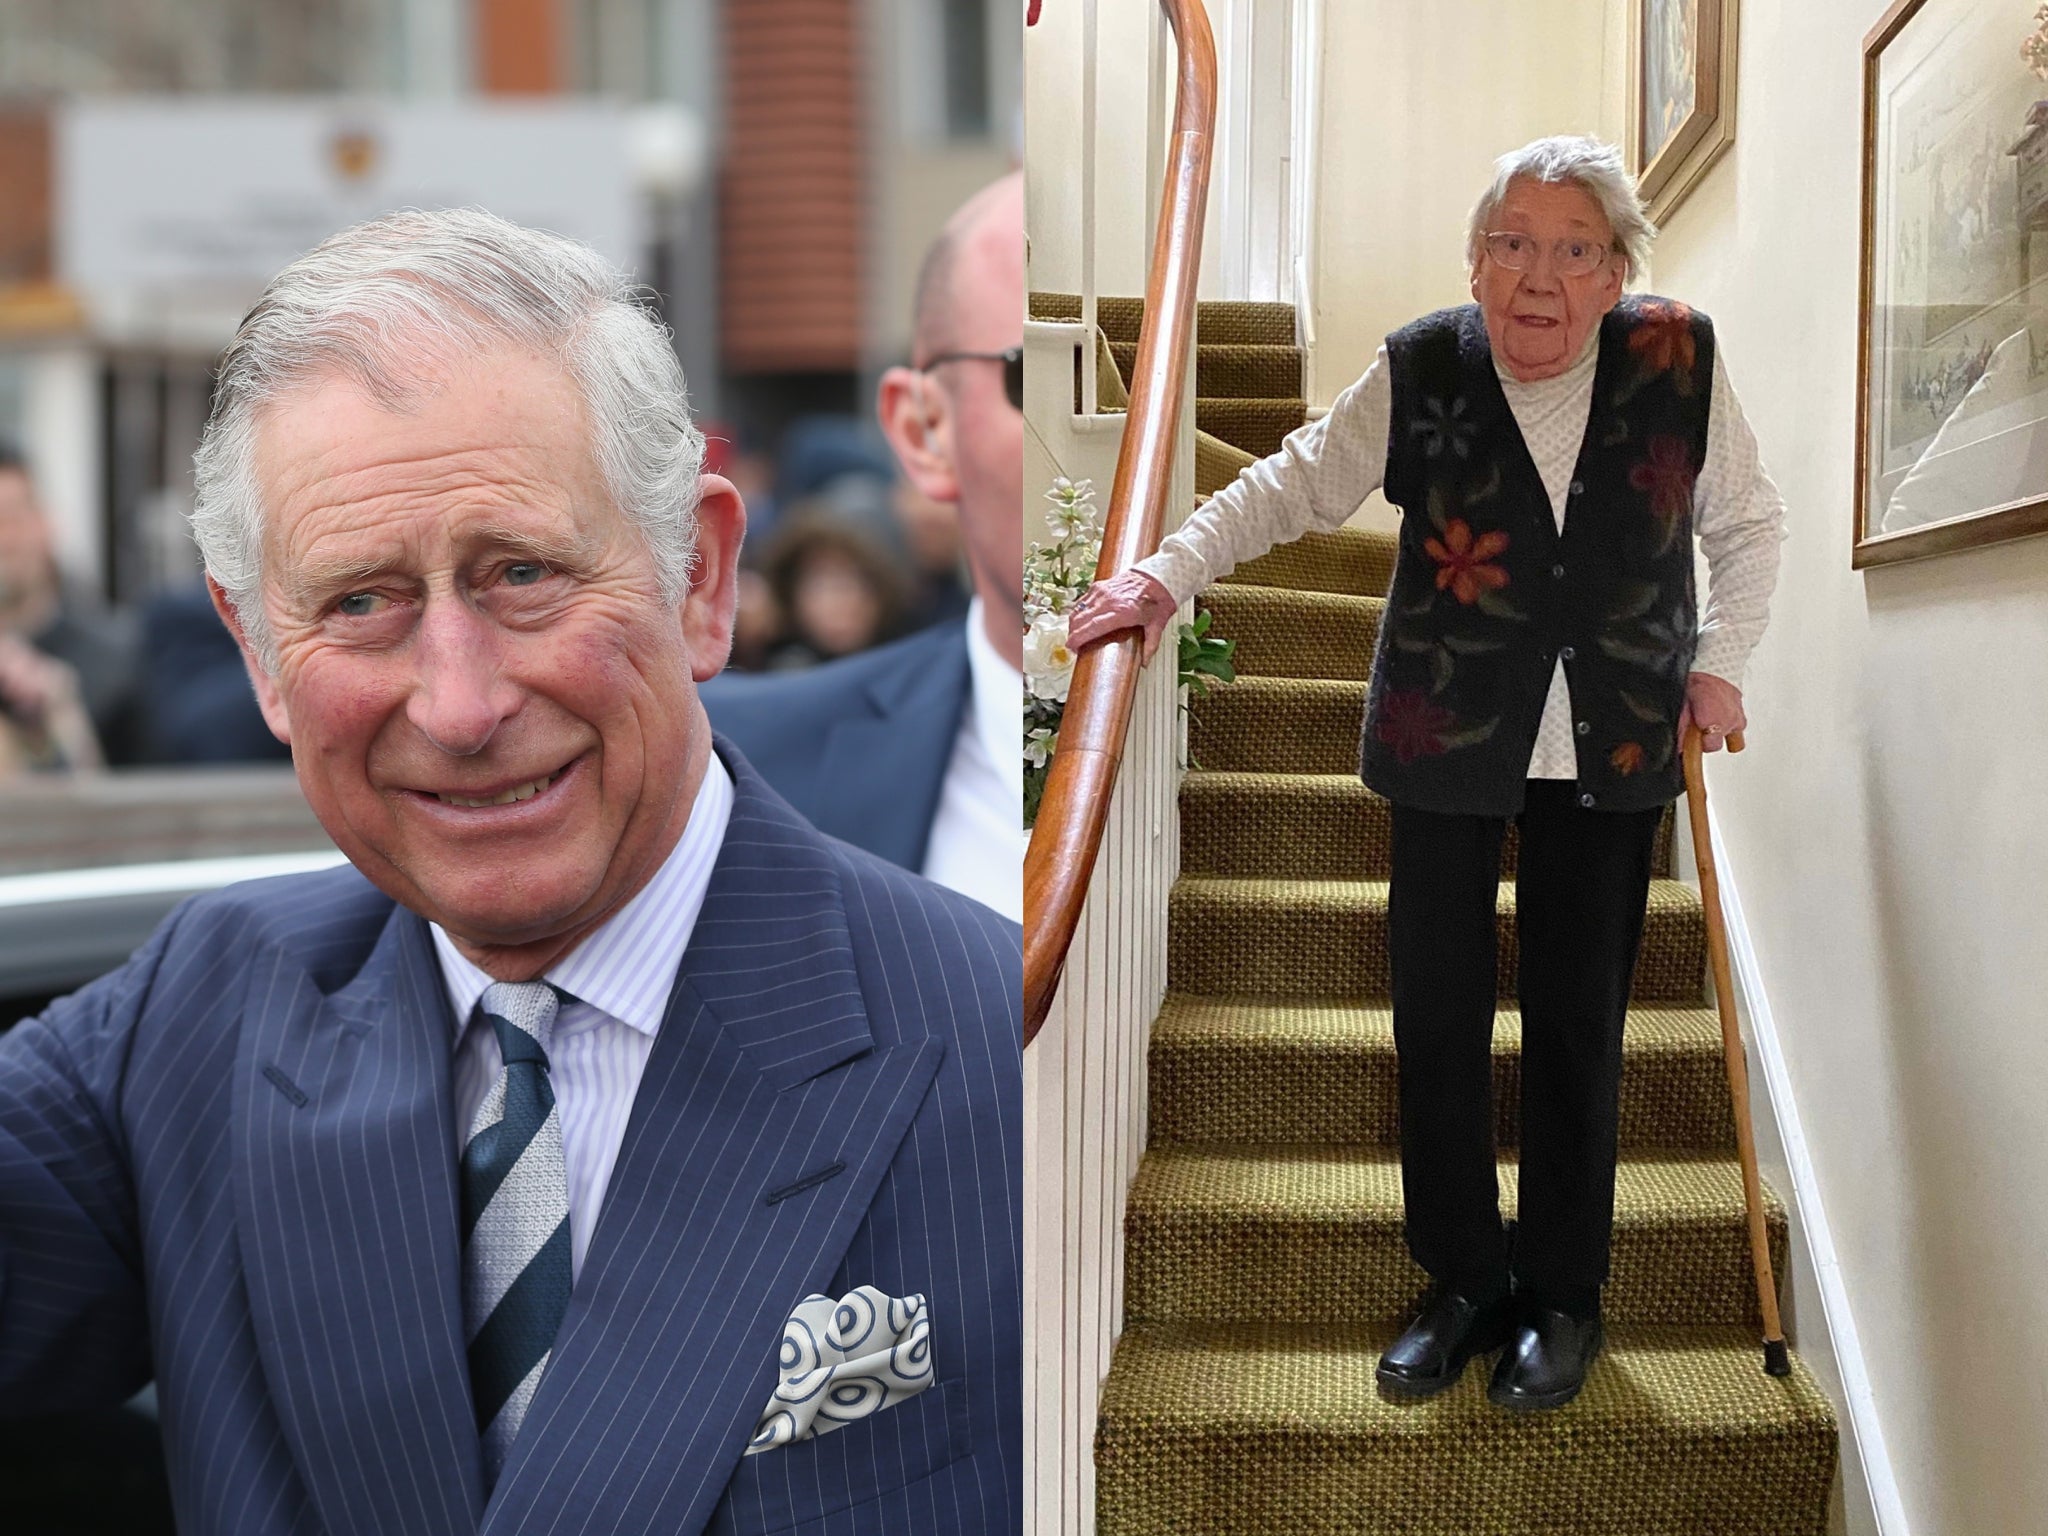 Prince Charles congratulates 90-year-old Margaret Payne for raising more than £340,000 for charity by climbing stairs